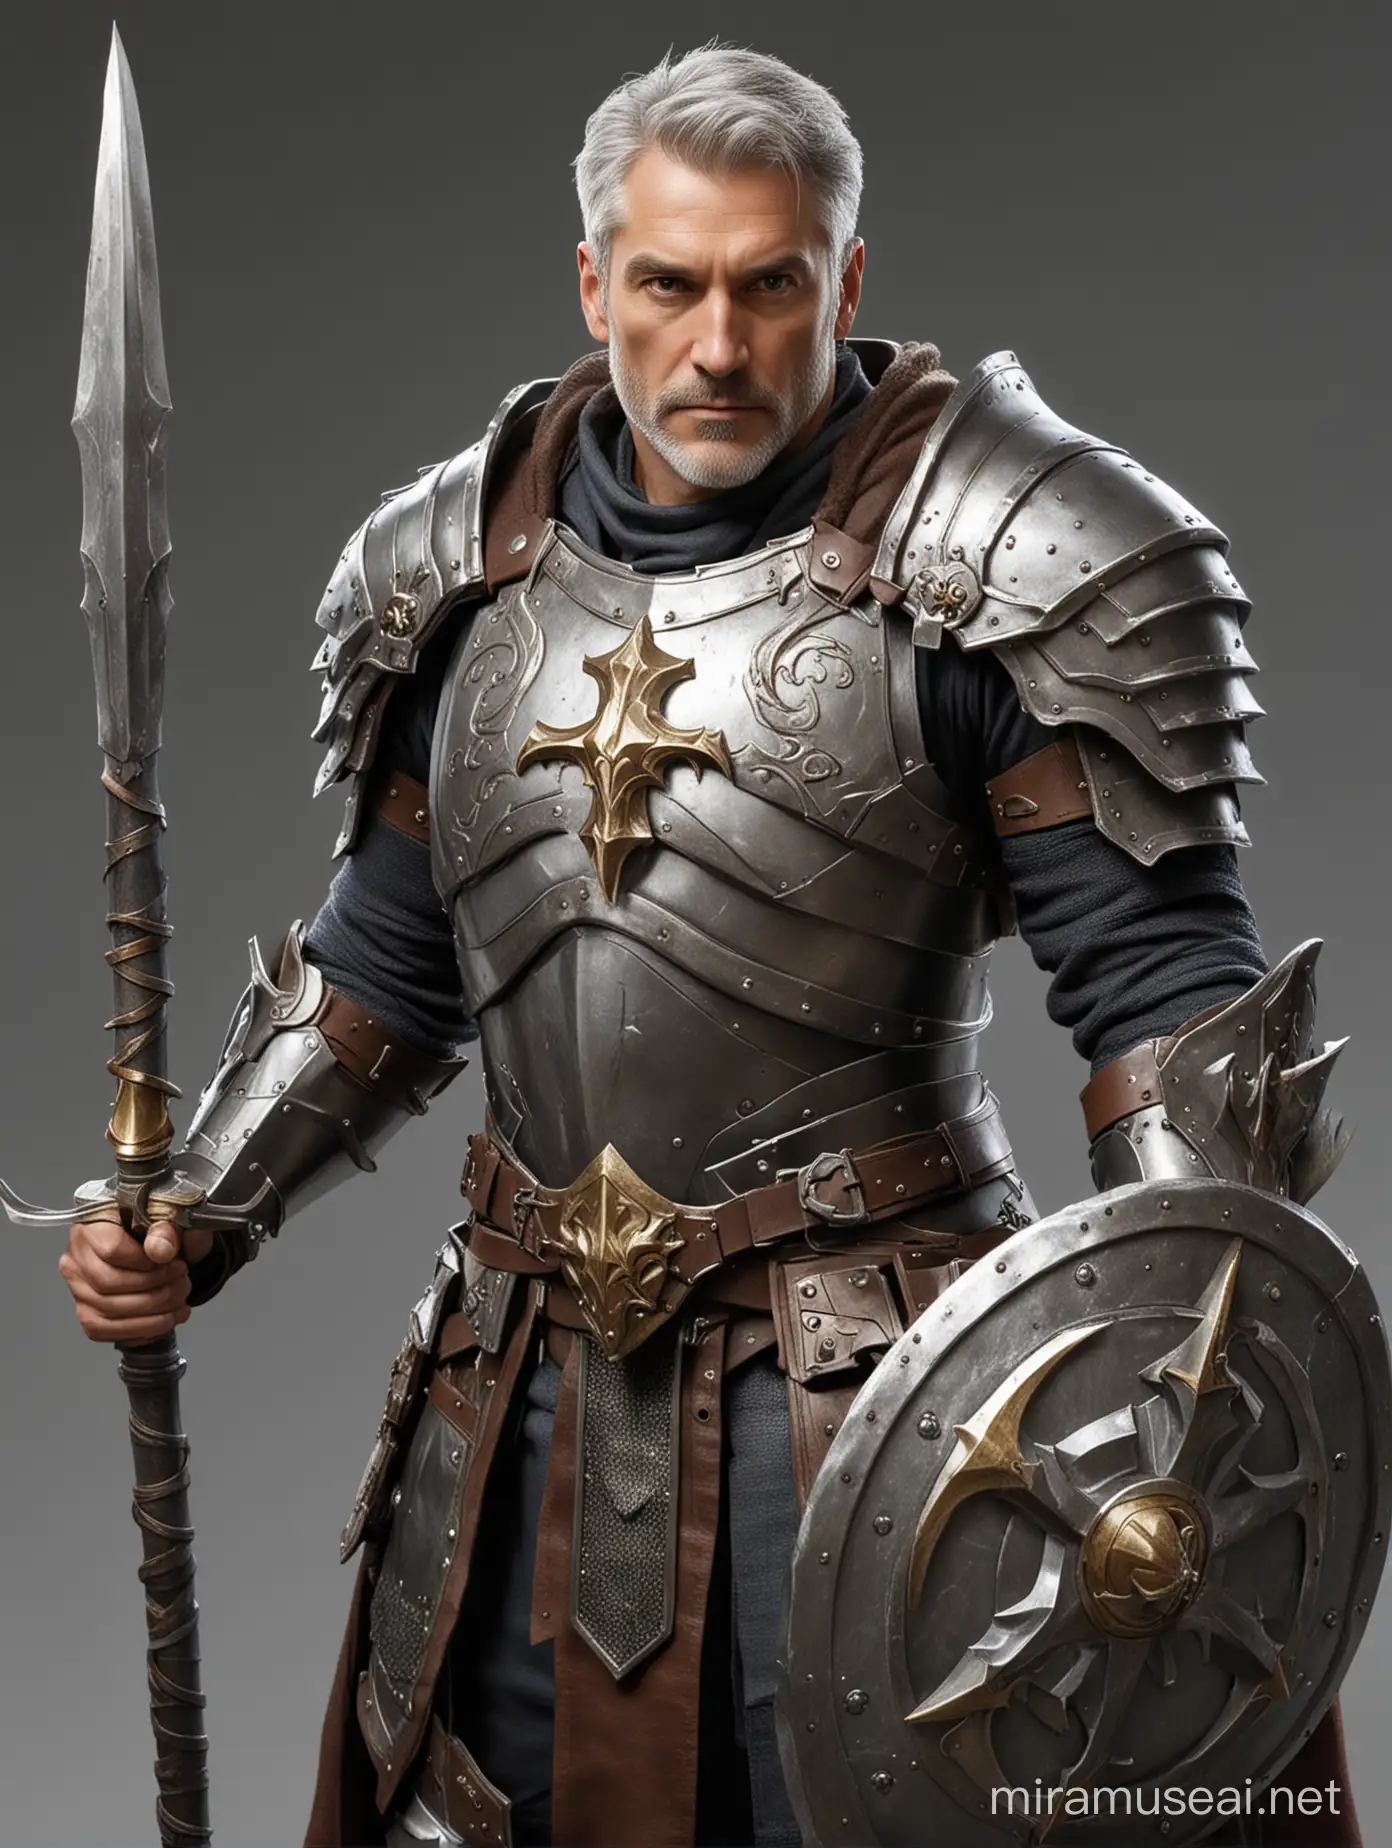 Human paladin, 50 years old man, partially grey hair, heavy armor, holding halberd and shield